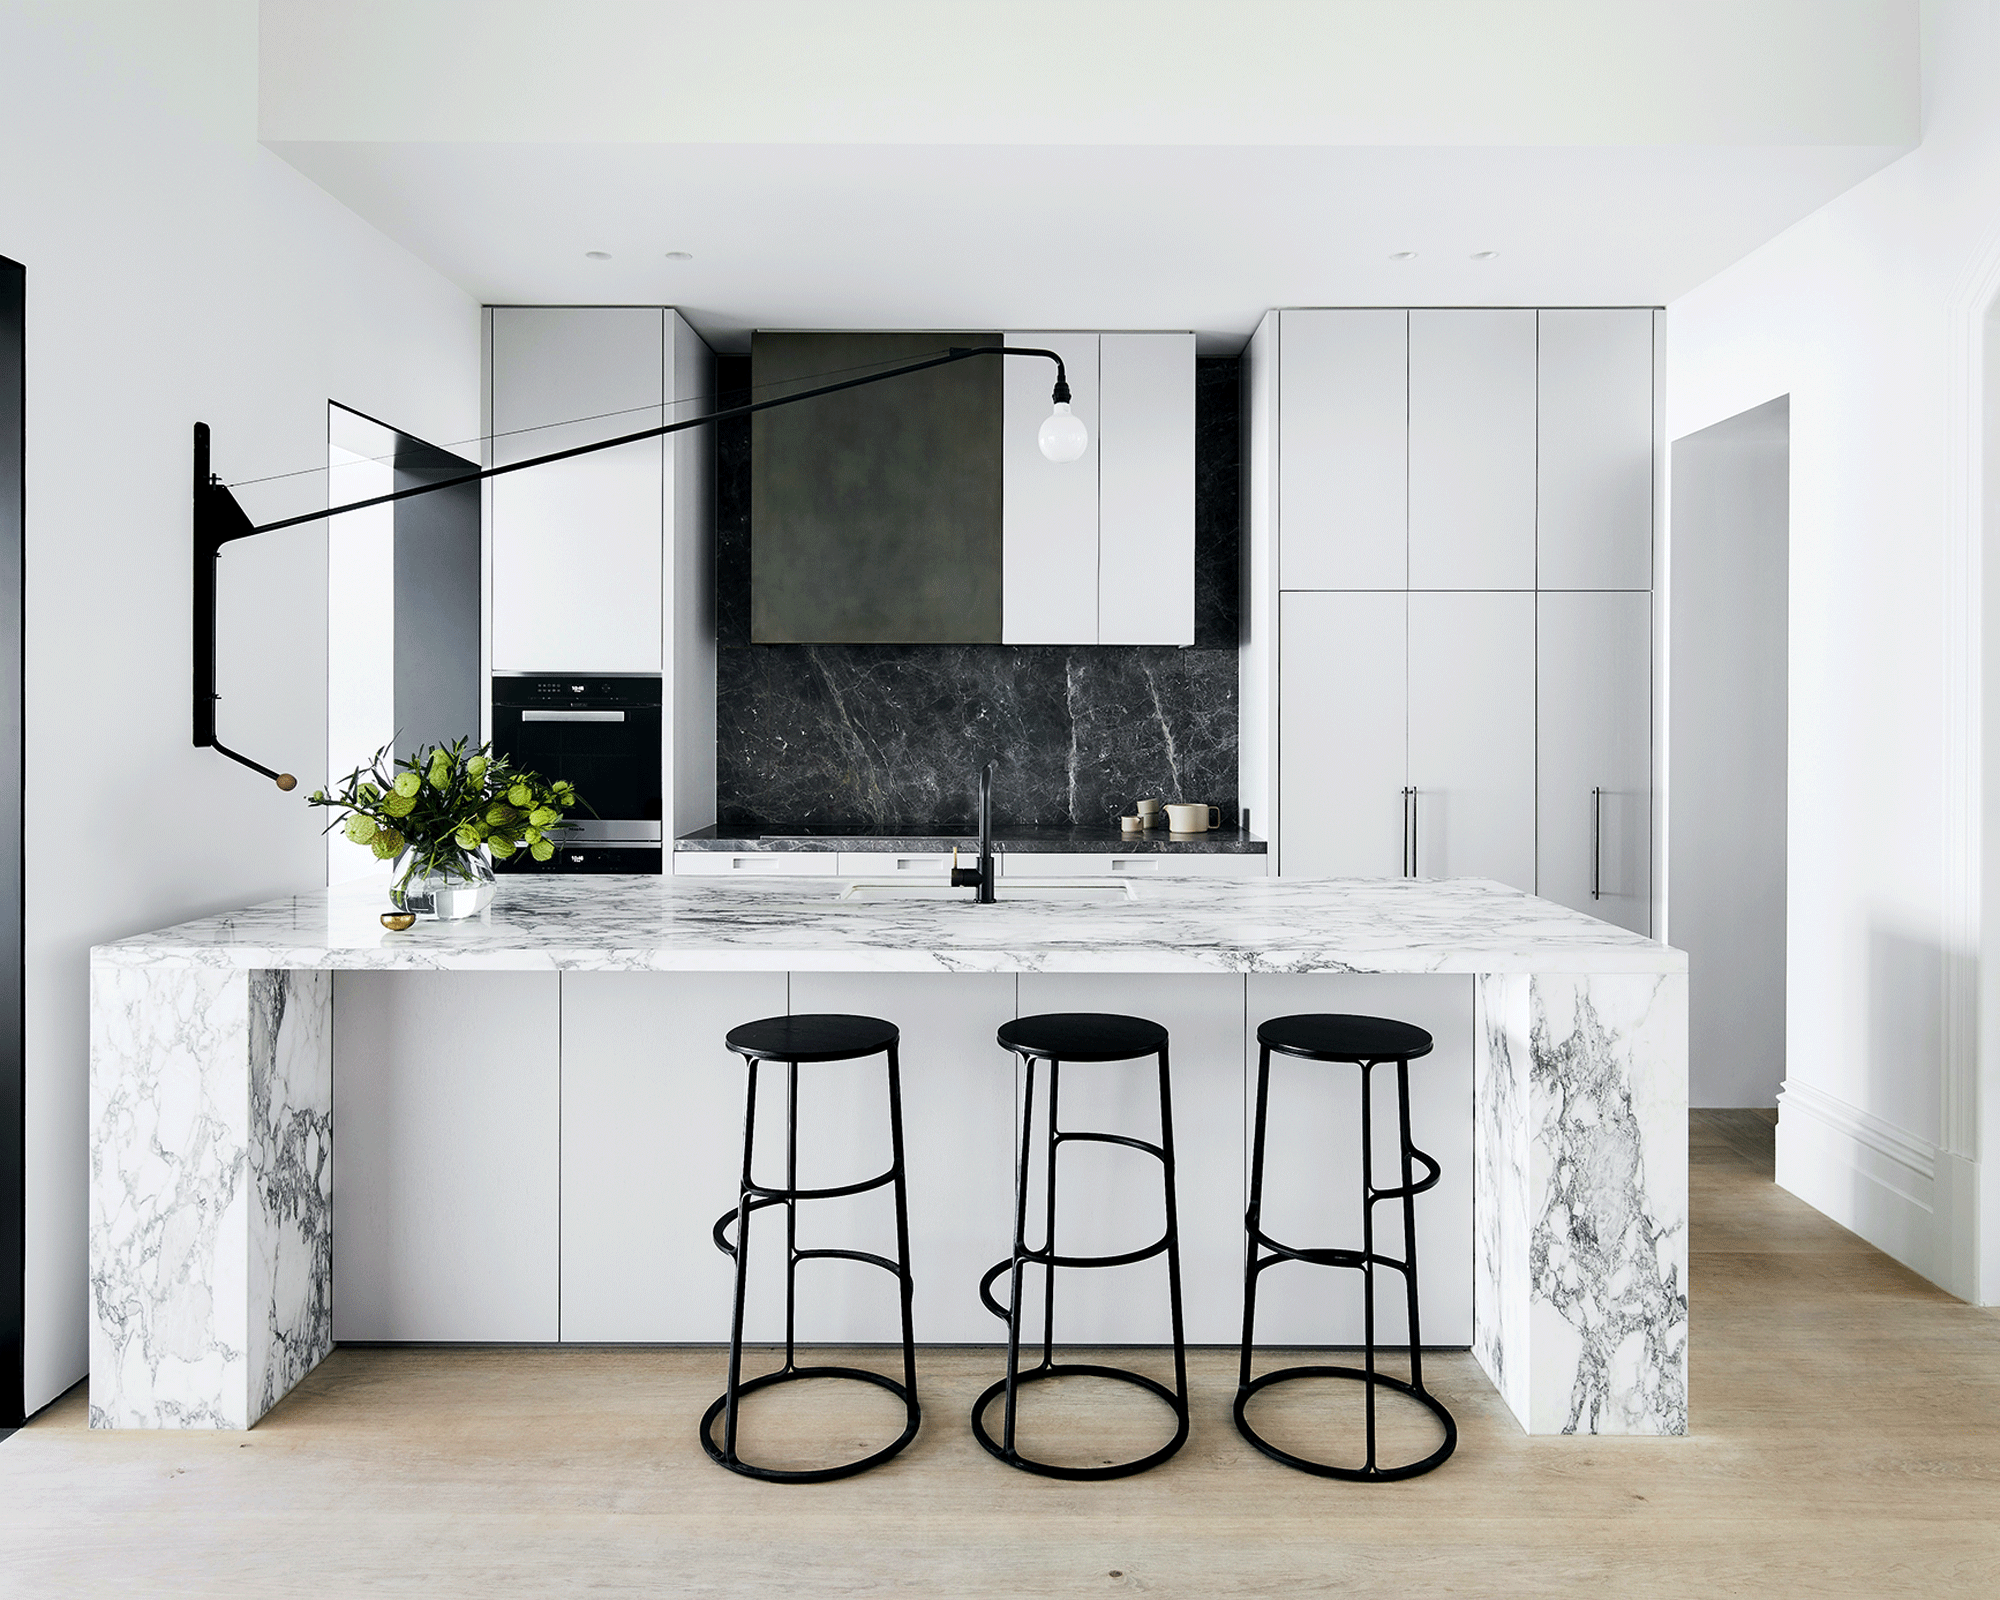 Kitchen with oversized wall light over the island